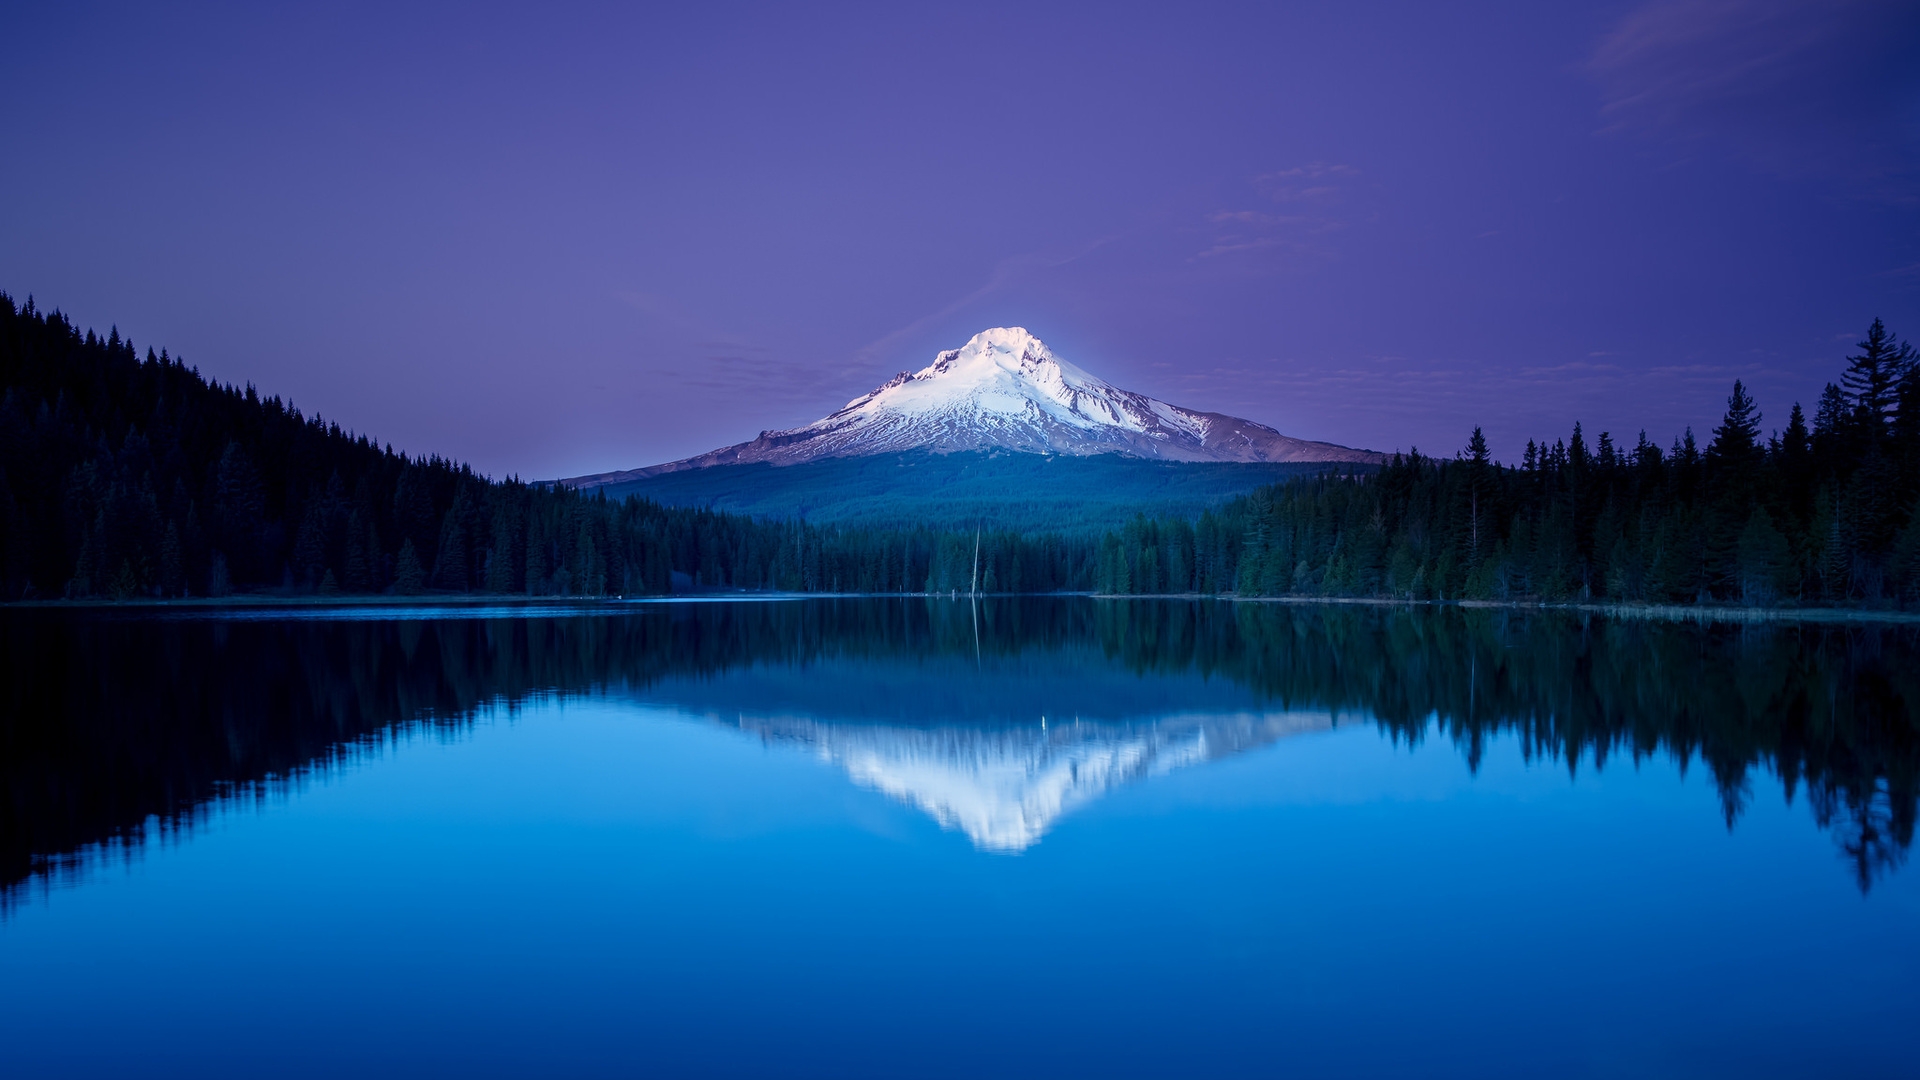 General 1920x1080 landscape mountains lake forest nature reflection Oregon USA snowy peak snowy mountain calm waters sky